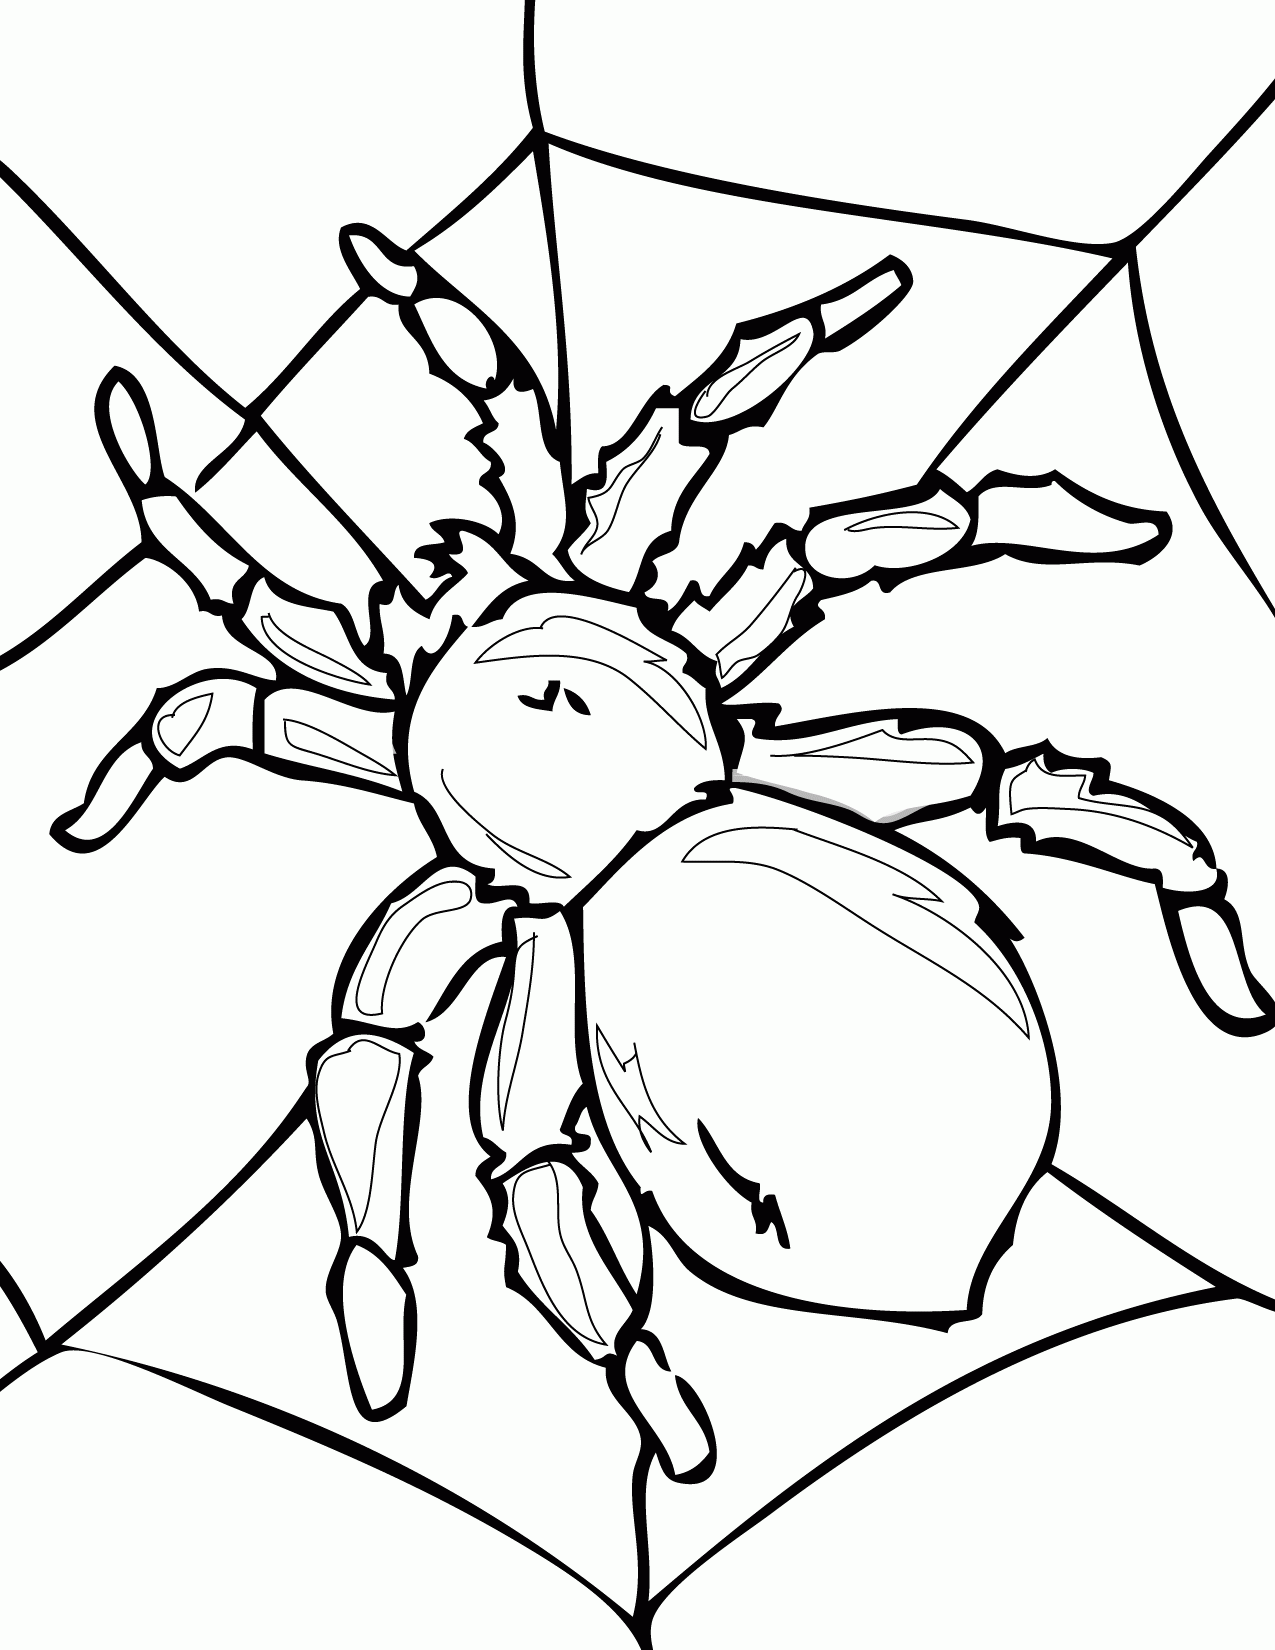 Spider Coloring Pages Printable - Coloring Page Photos